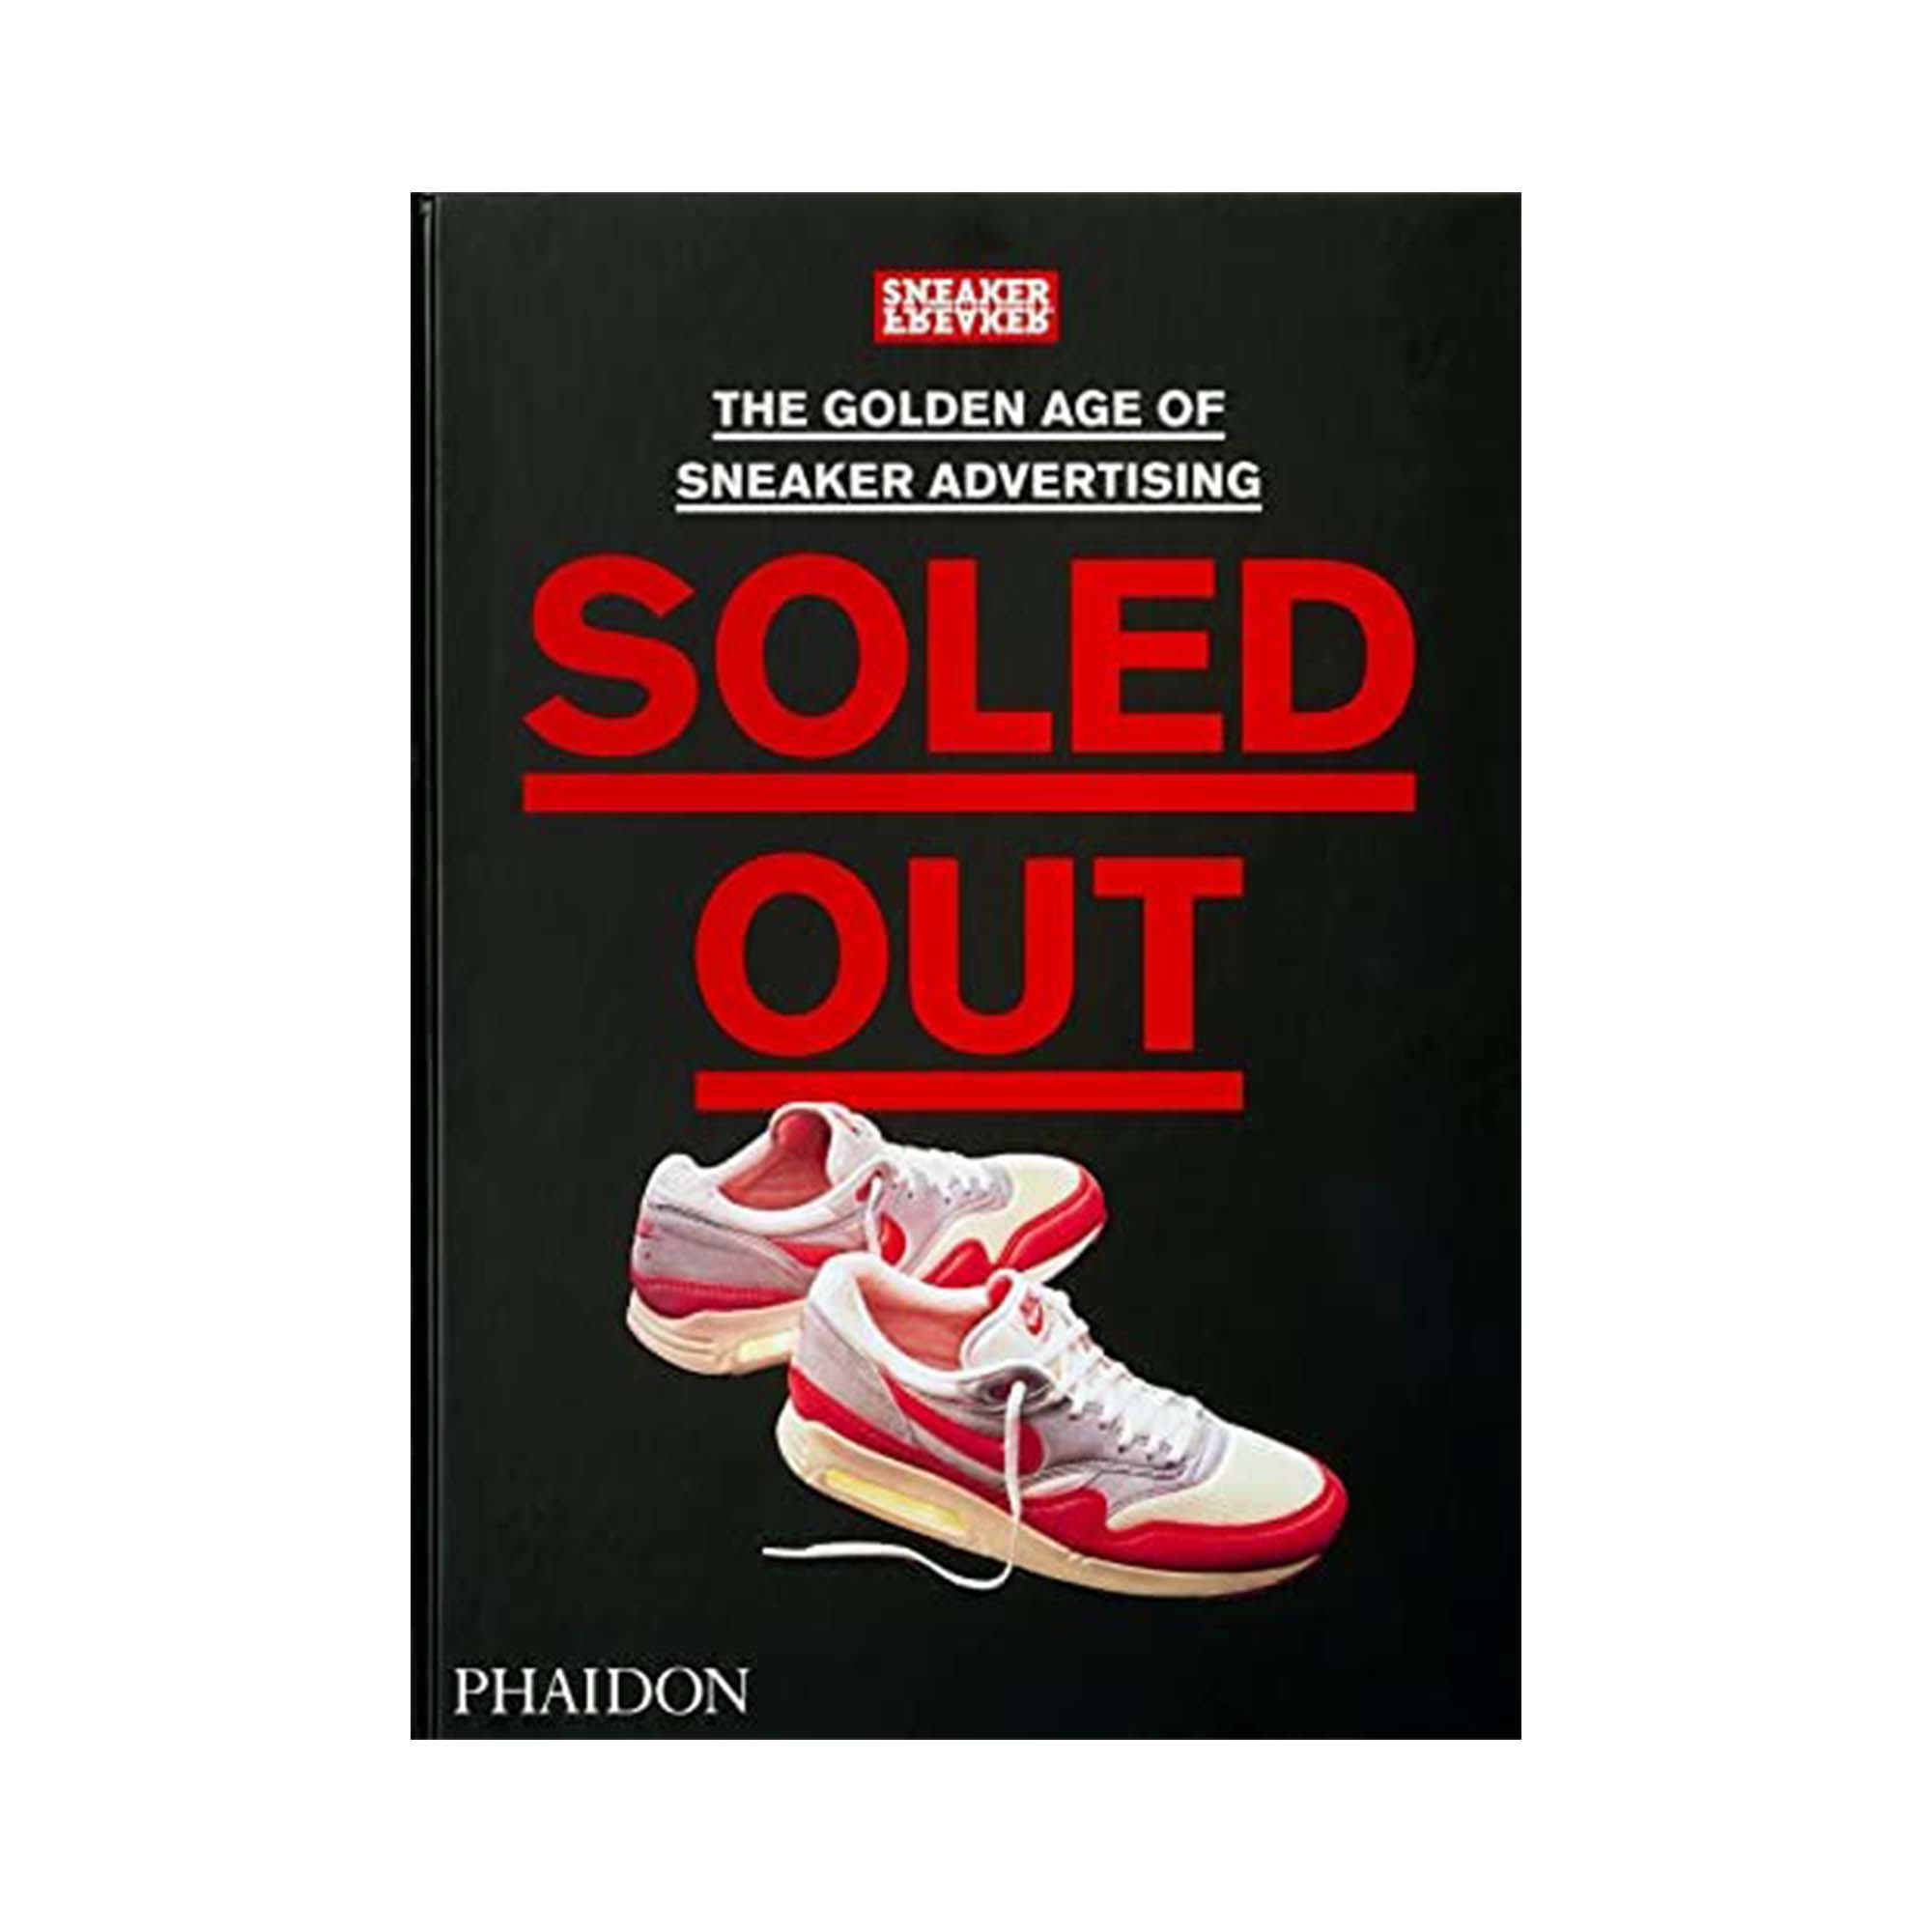 Soled Out: The Golden Age of Sneaker Advertising (A Sneaker Freaker Book) - Hardcover